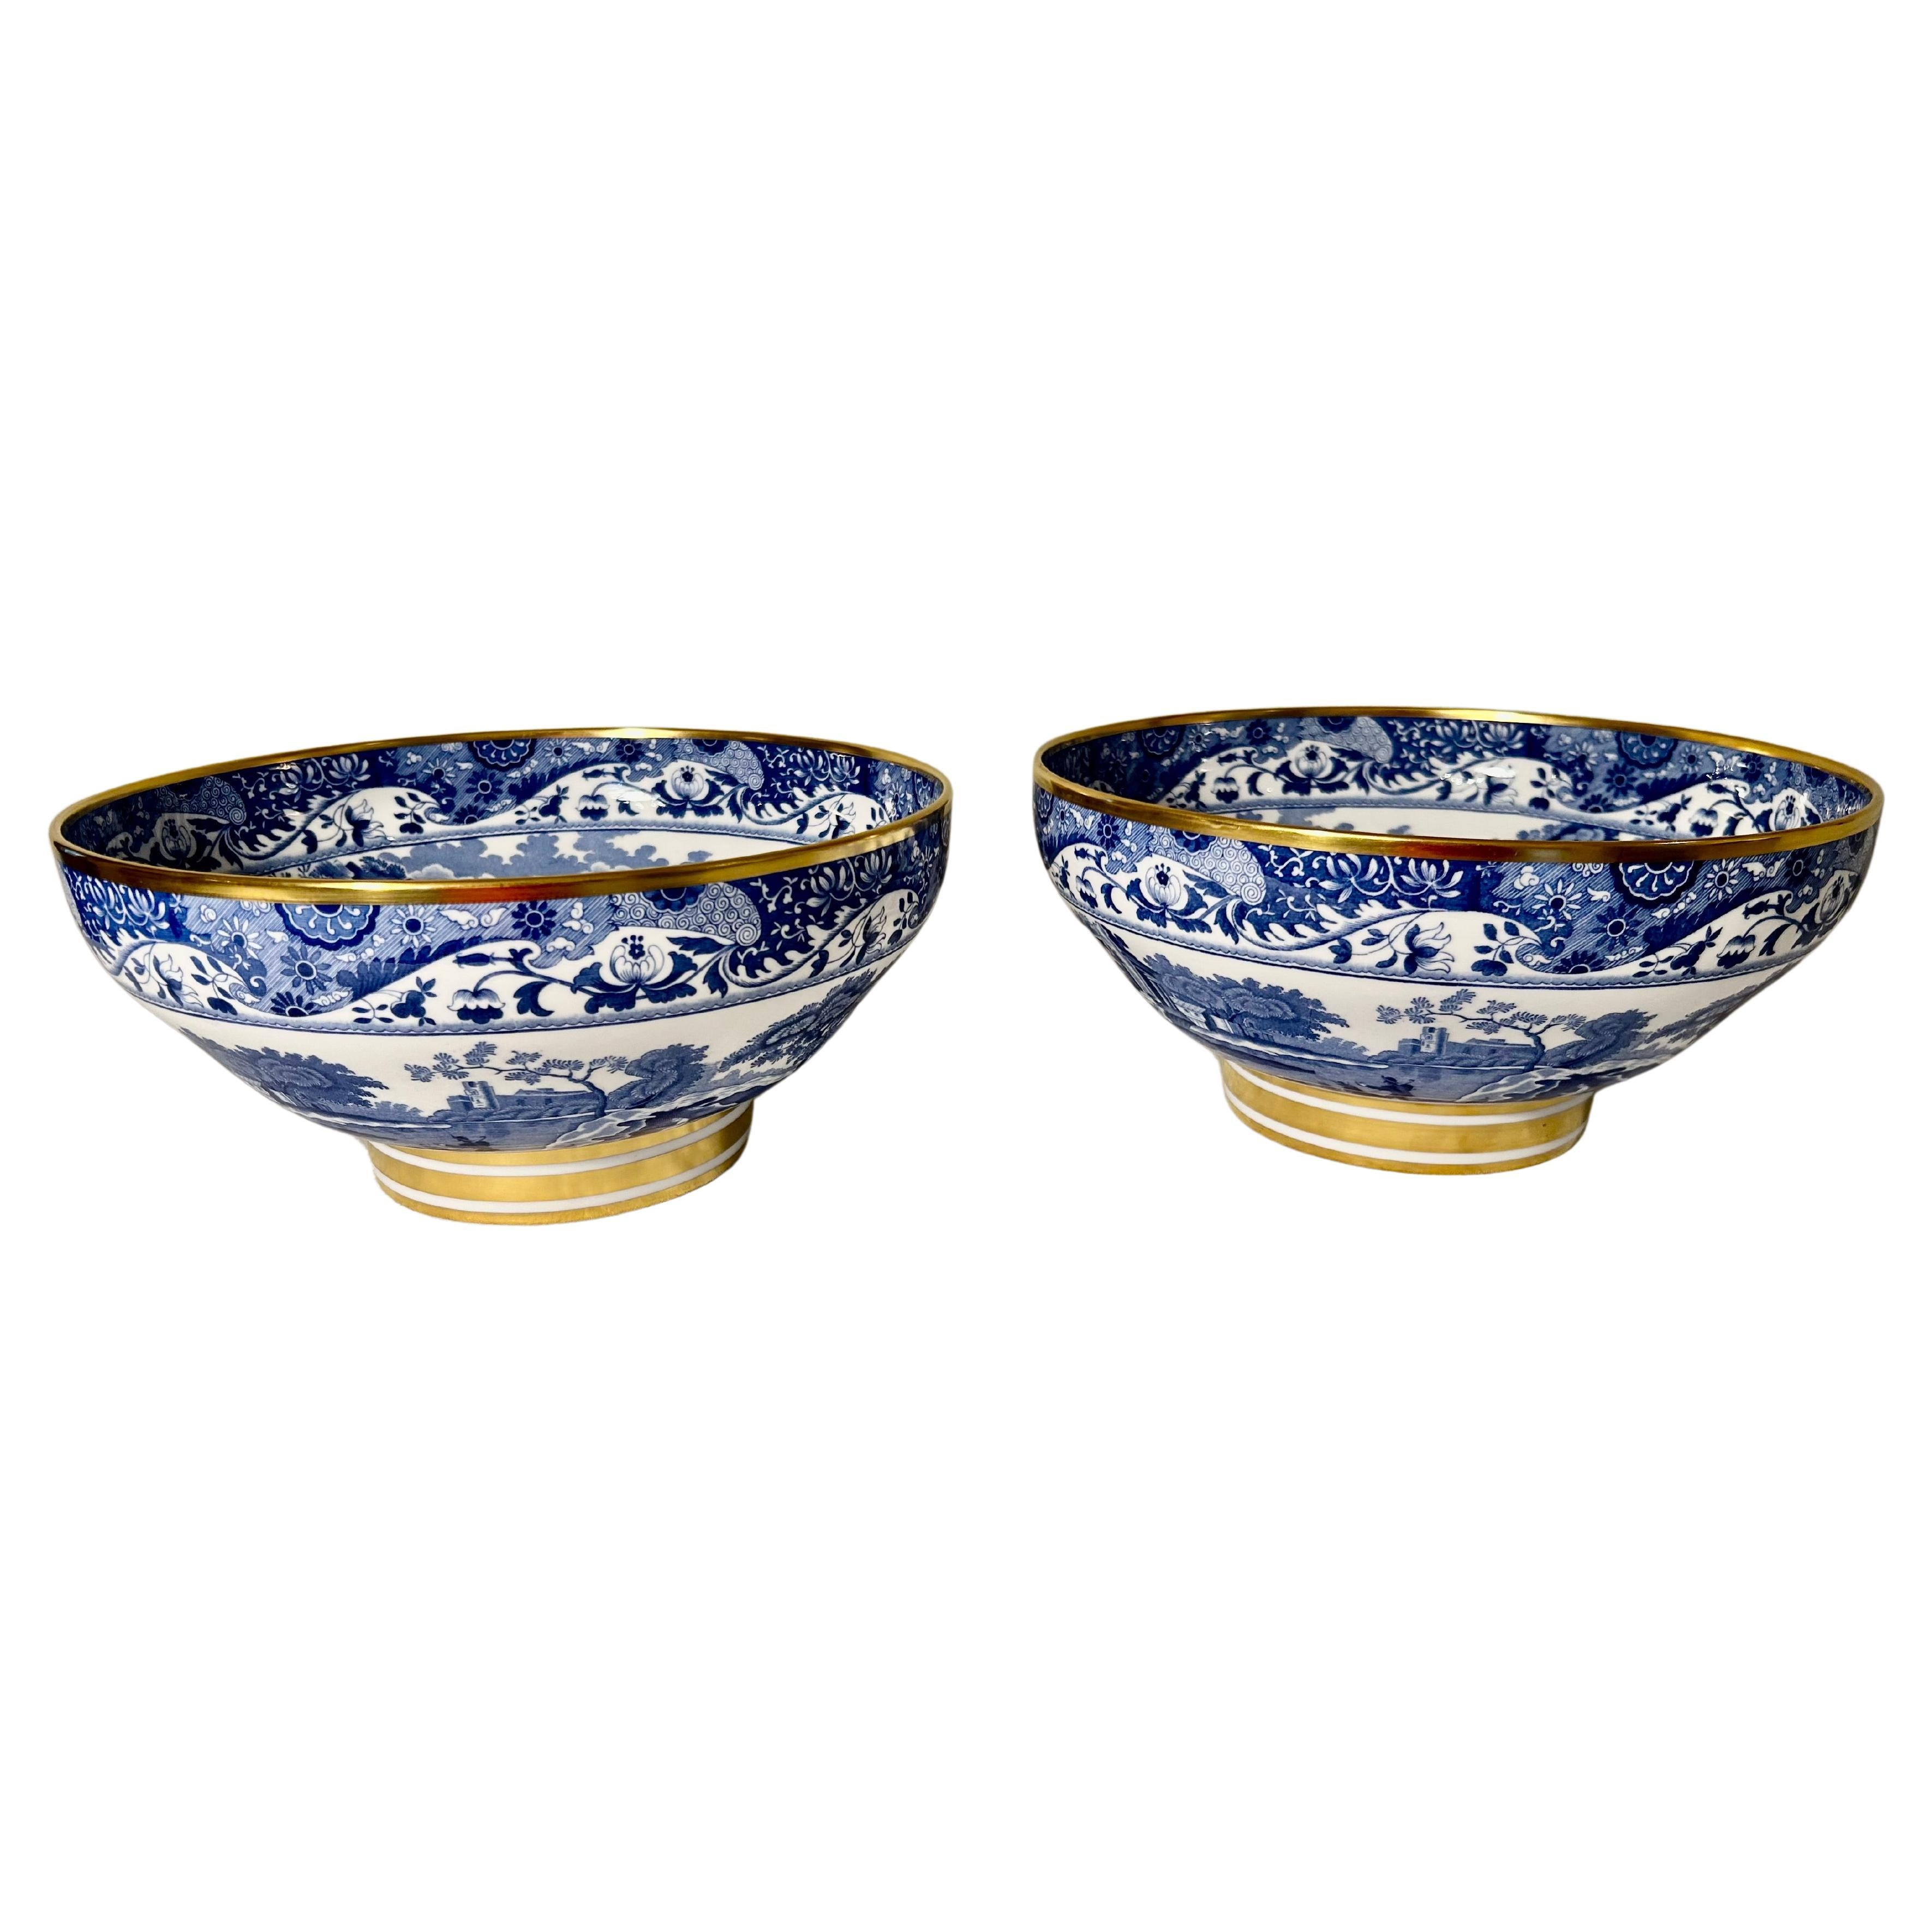  Set of Copeland Spode Bowls, Blue and White Italian Pattern For Sale